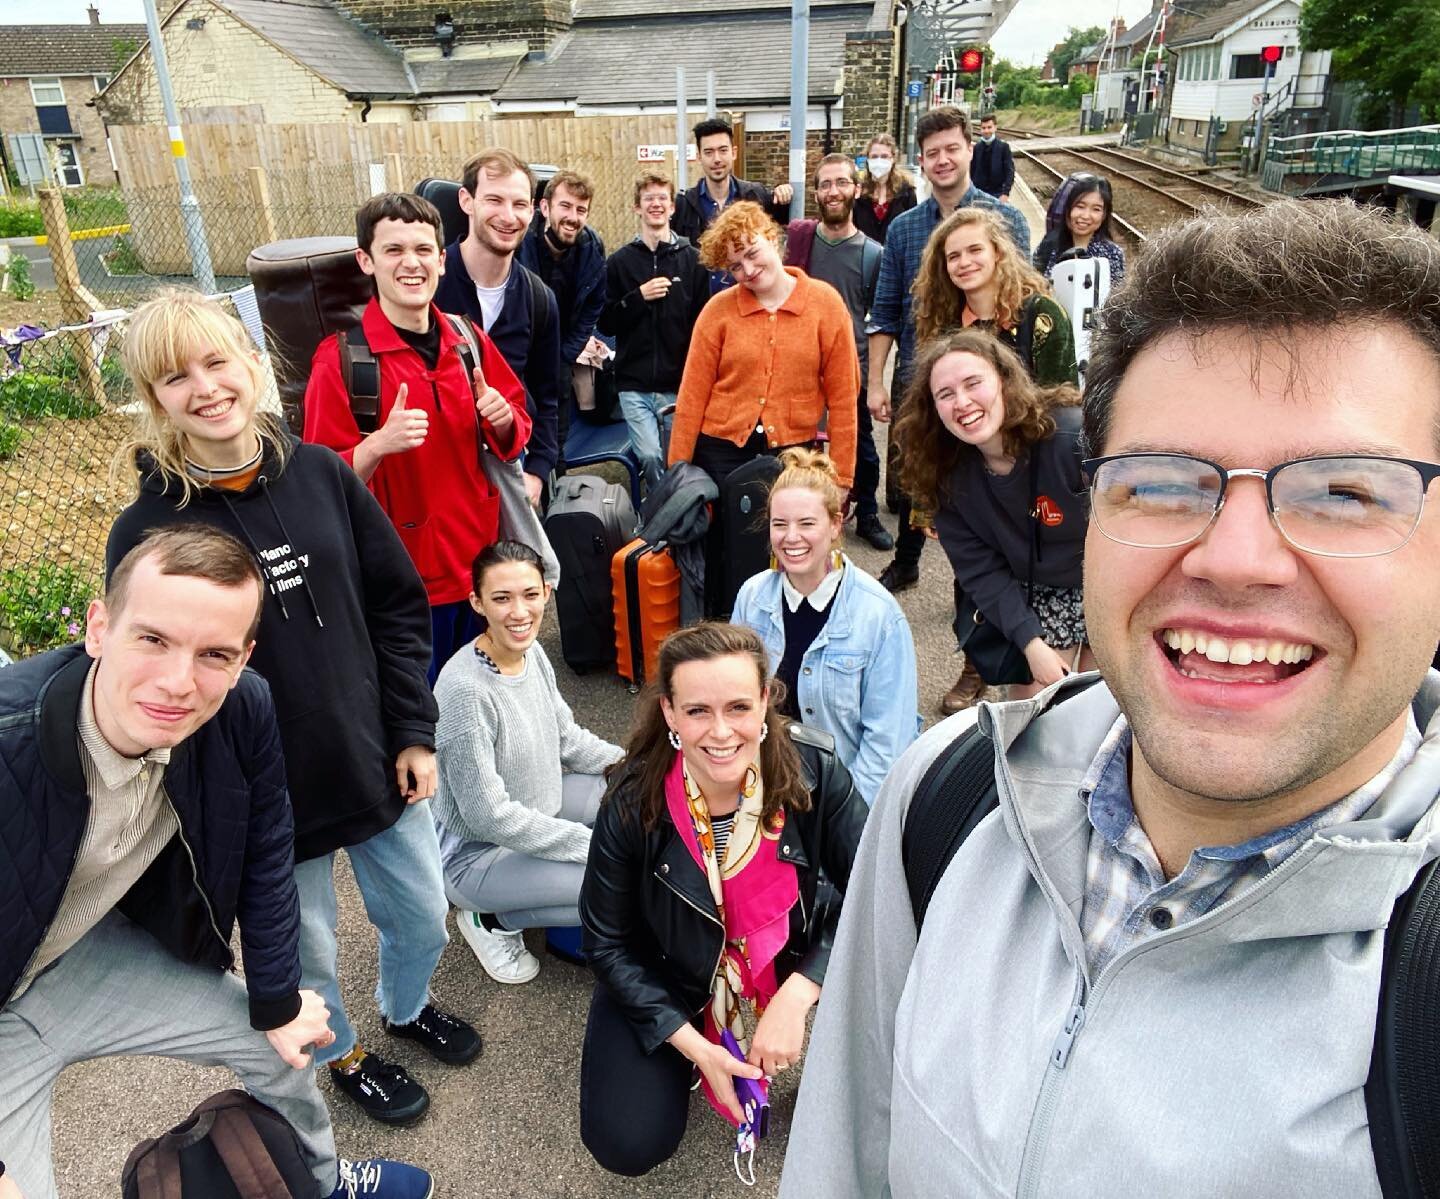 platform pic of most of the @brittenpearsarts young artist gang - thanks for the snap, Josh from @slideaction!